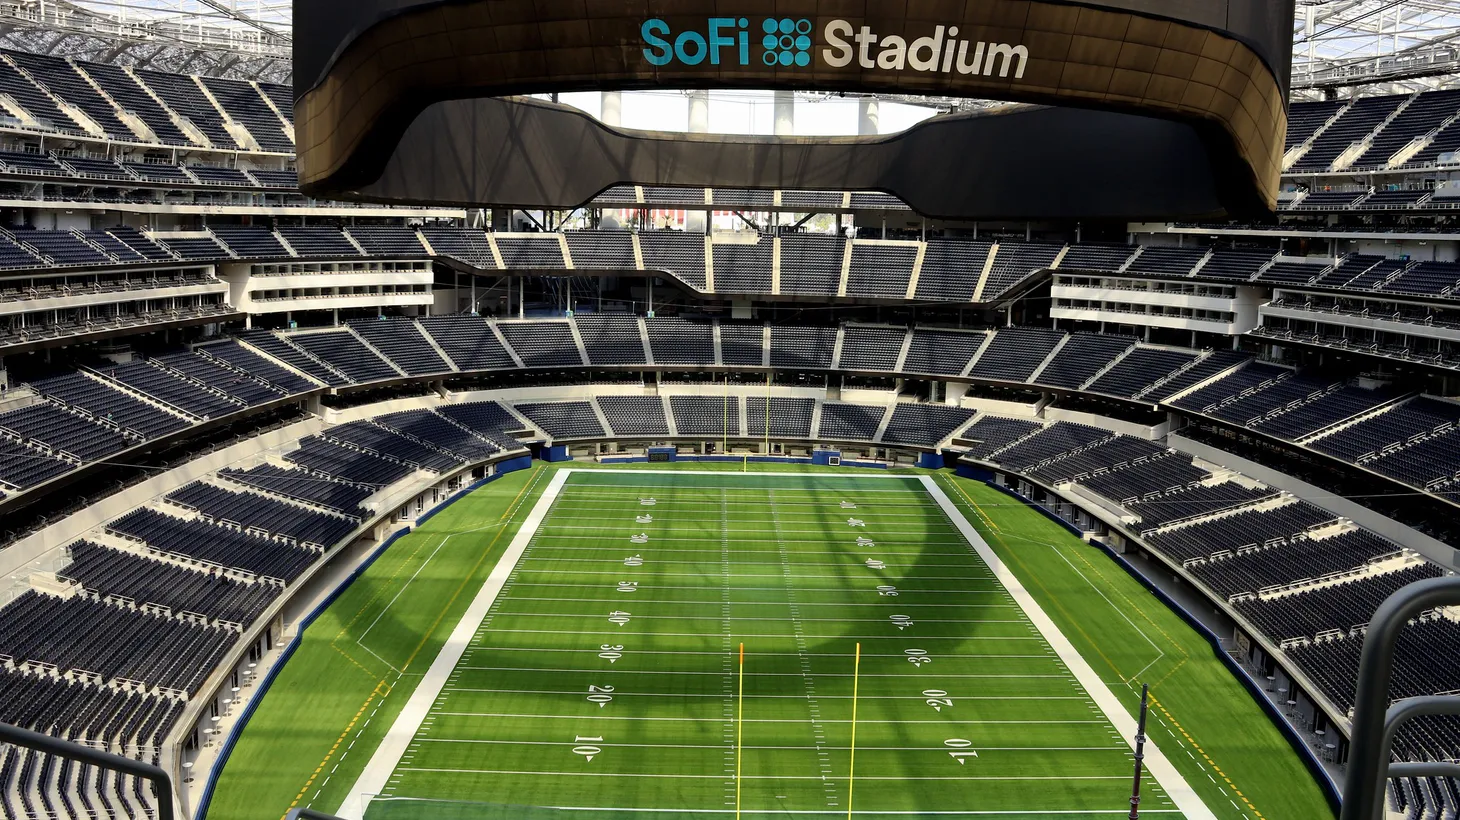 What does SoFi Stadium stand for?